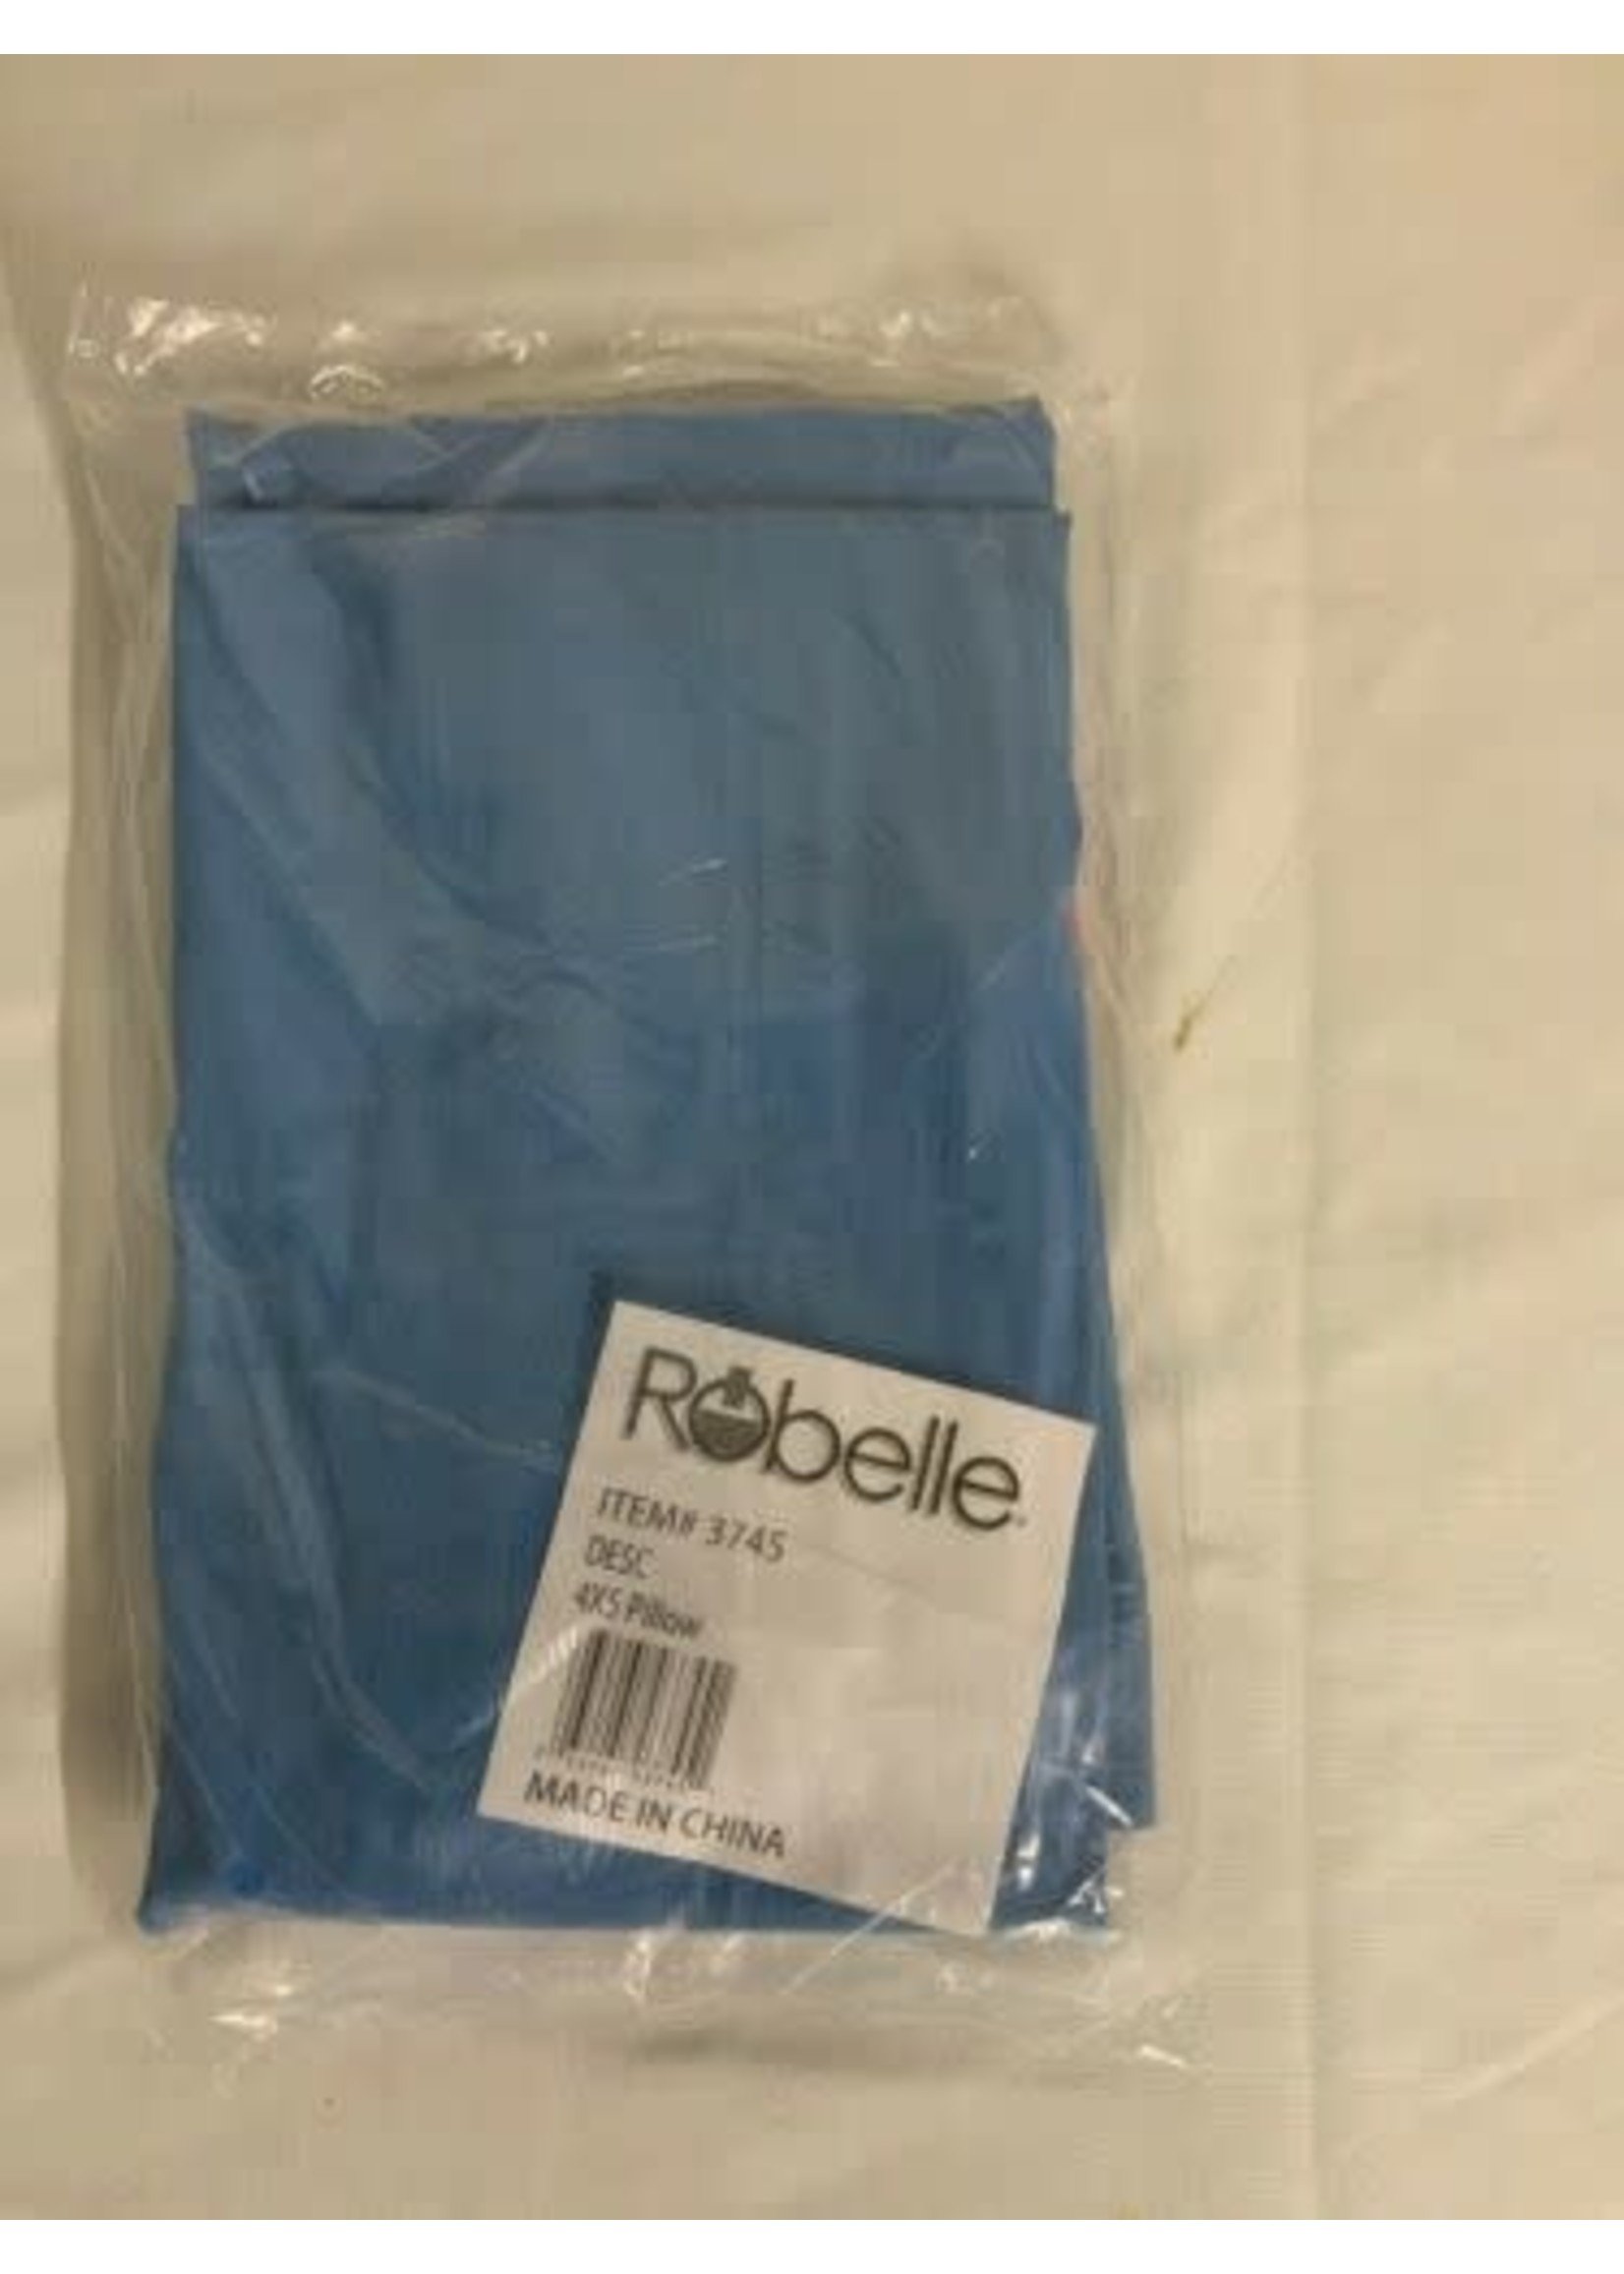 Robelle Swimming Pool Closing Winter Cover Ice Equalizer Air Pillow 4’ By 5’